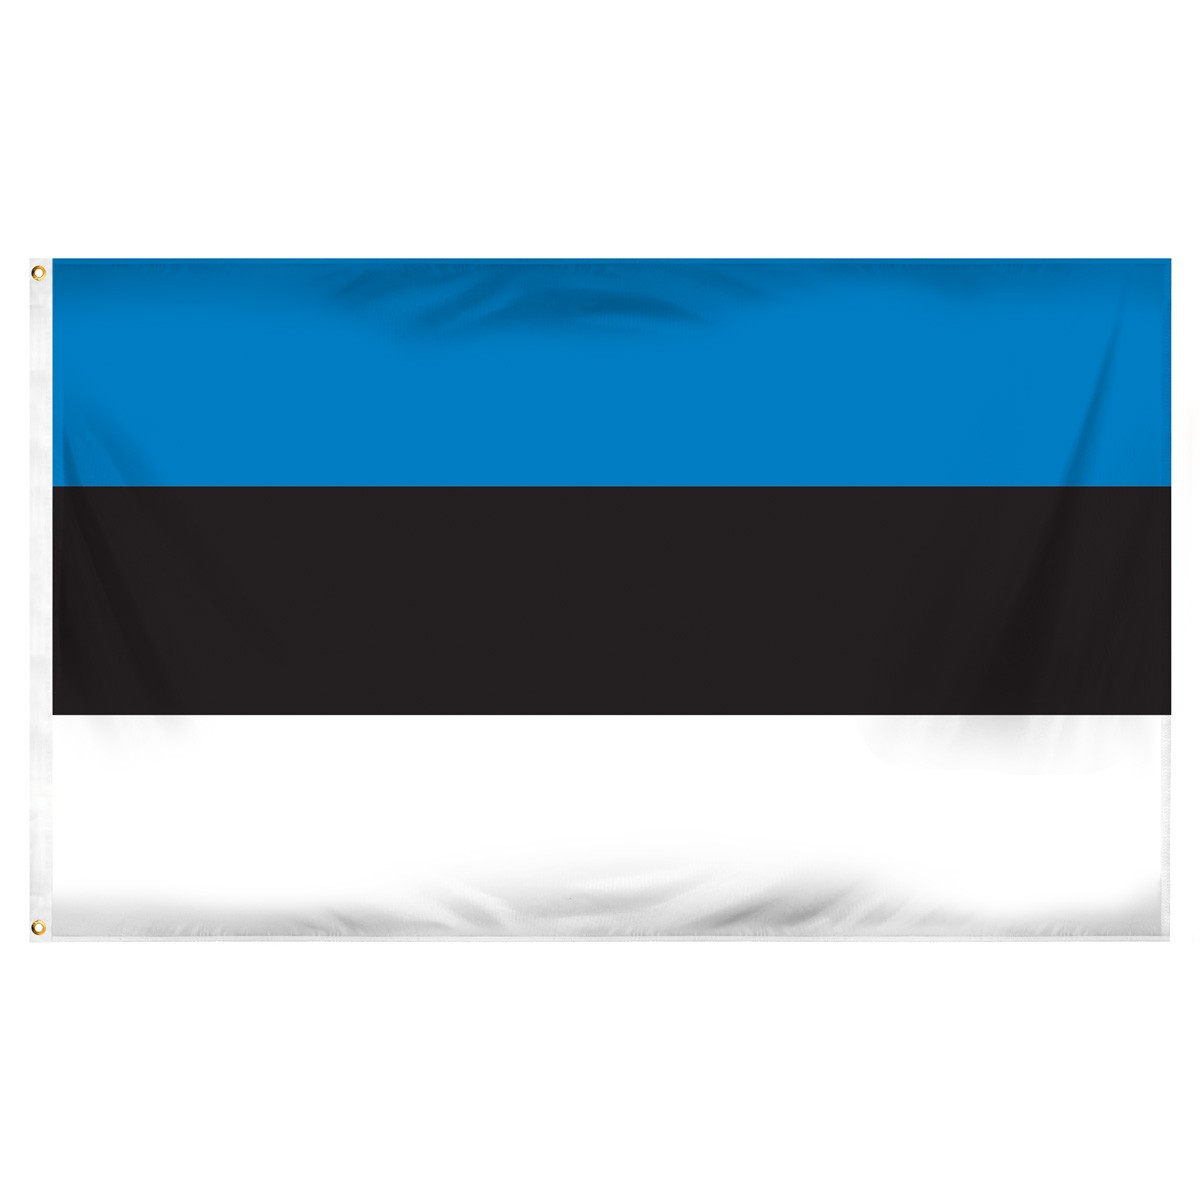 Estonia Flags and Pennants